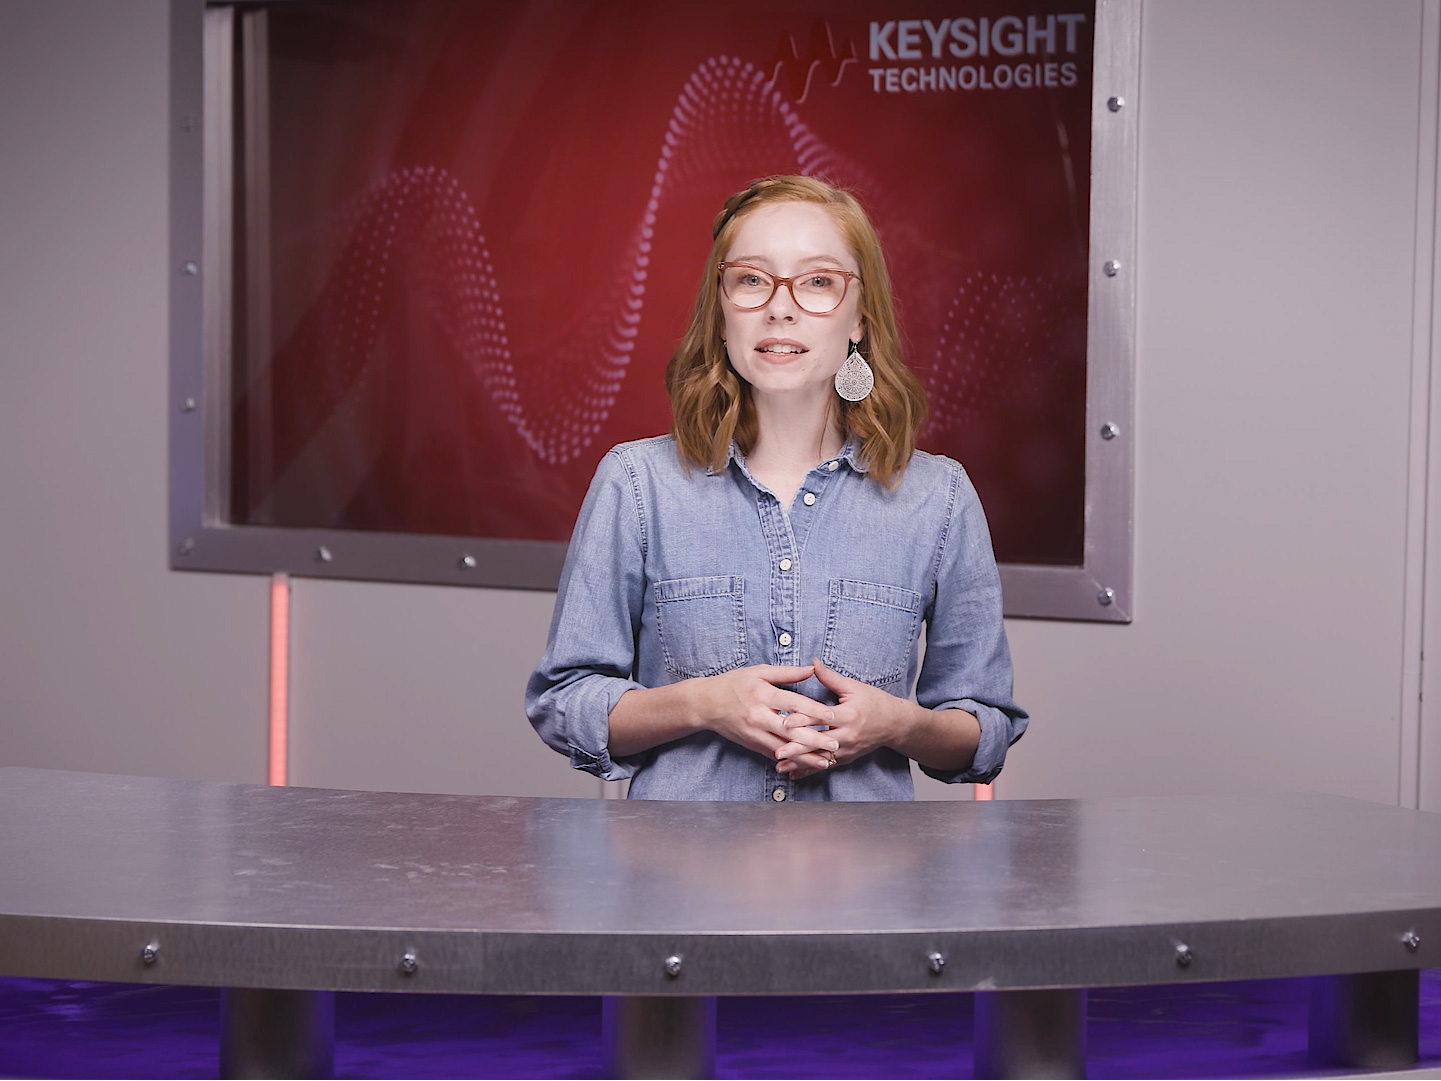 Woman standing behind a counter and in front of a screen with Keysight Technologies in righthand corner. decoding=